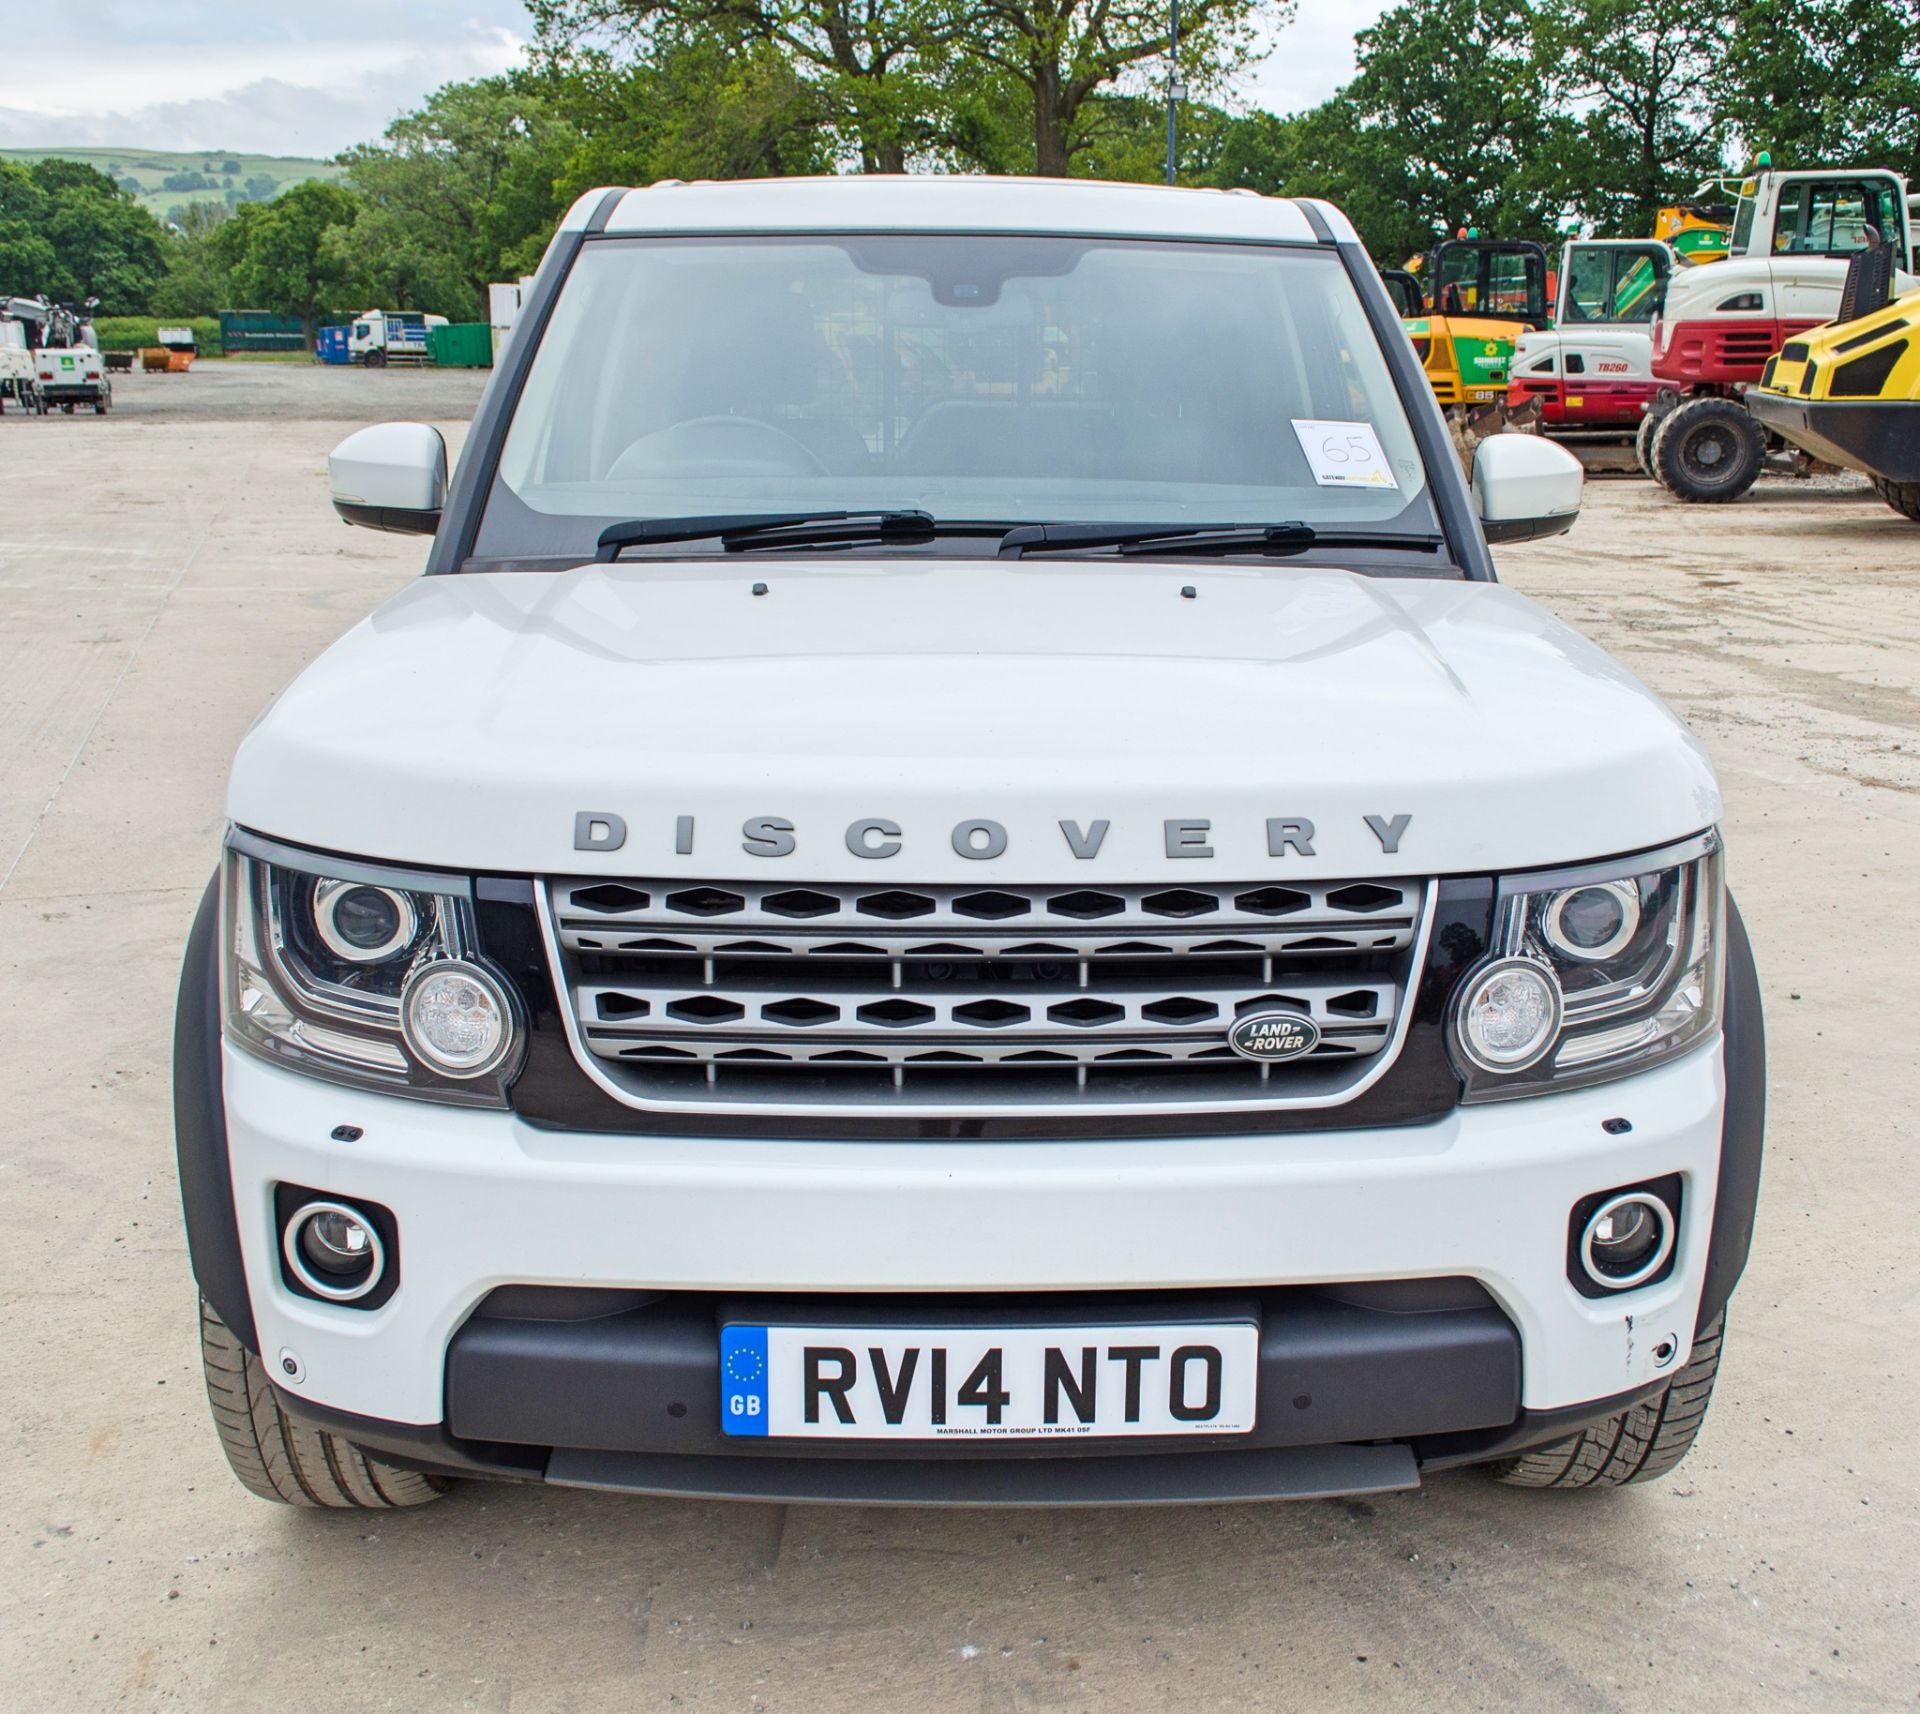 Land Rover Discovery 4 3.0 SDV6 255 XS Commercial 4x4 utility vehicle Registration Number: RV14 - Image 5 of 33